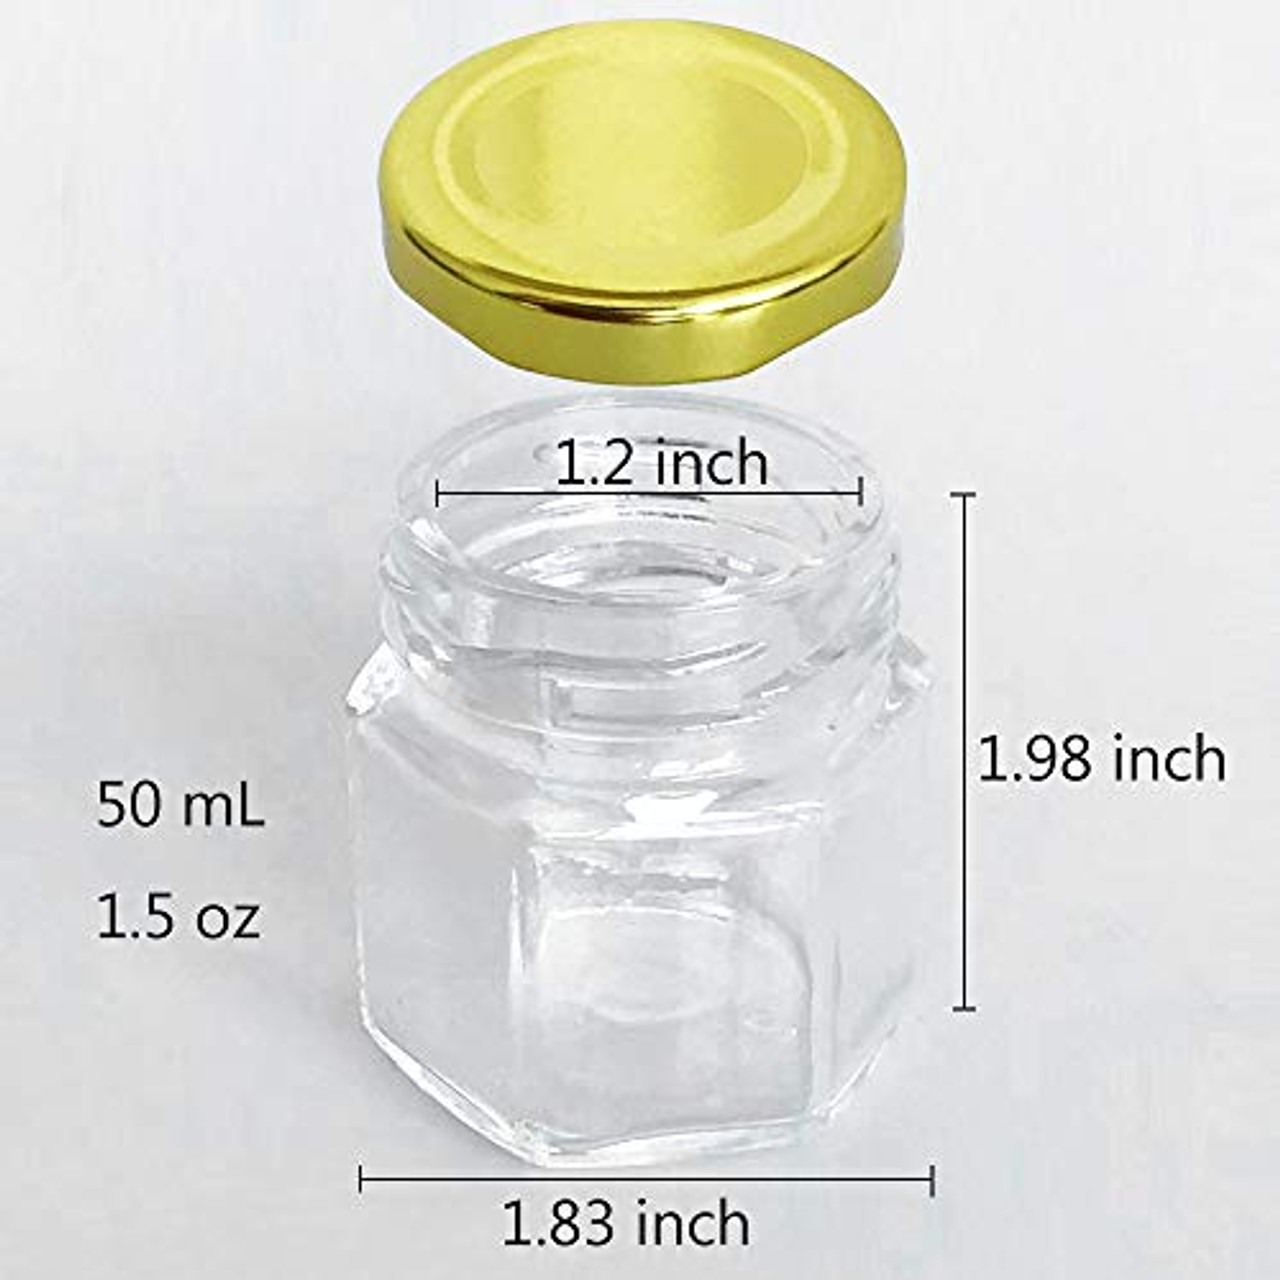 Folinstall 60 Pack Small Glass Jars with Lids, 1.5 oz Mini Honey Jars,  Candle Jar for Candle Making for Gifts, Crafts, Spices, Wedding, Party  Favors